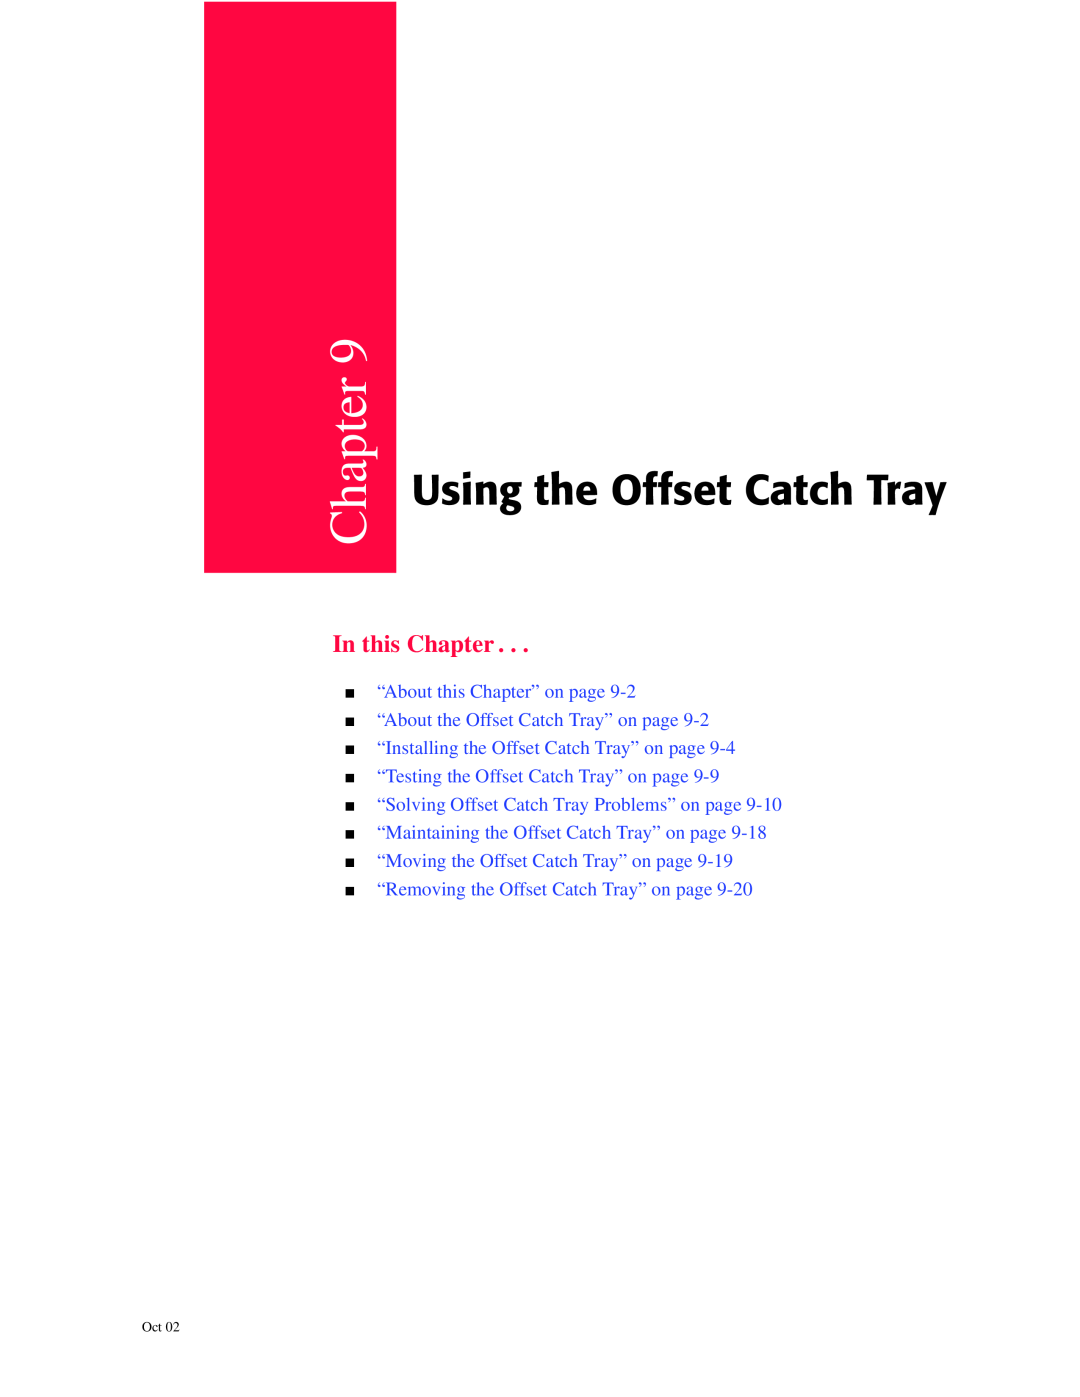 Oki 6100 manual Using the Offset Catch Tray, In this Chapter, “Installing the Offset Catch Tray” on page 